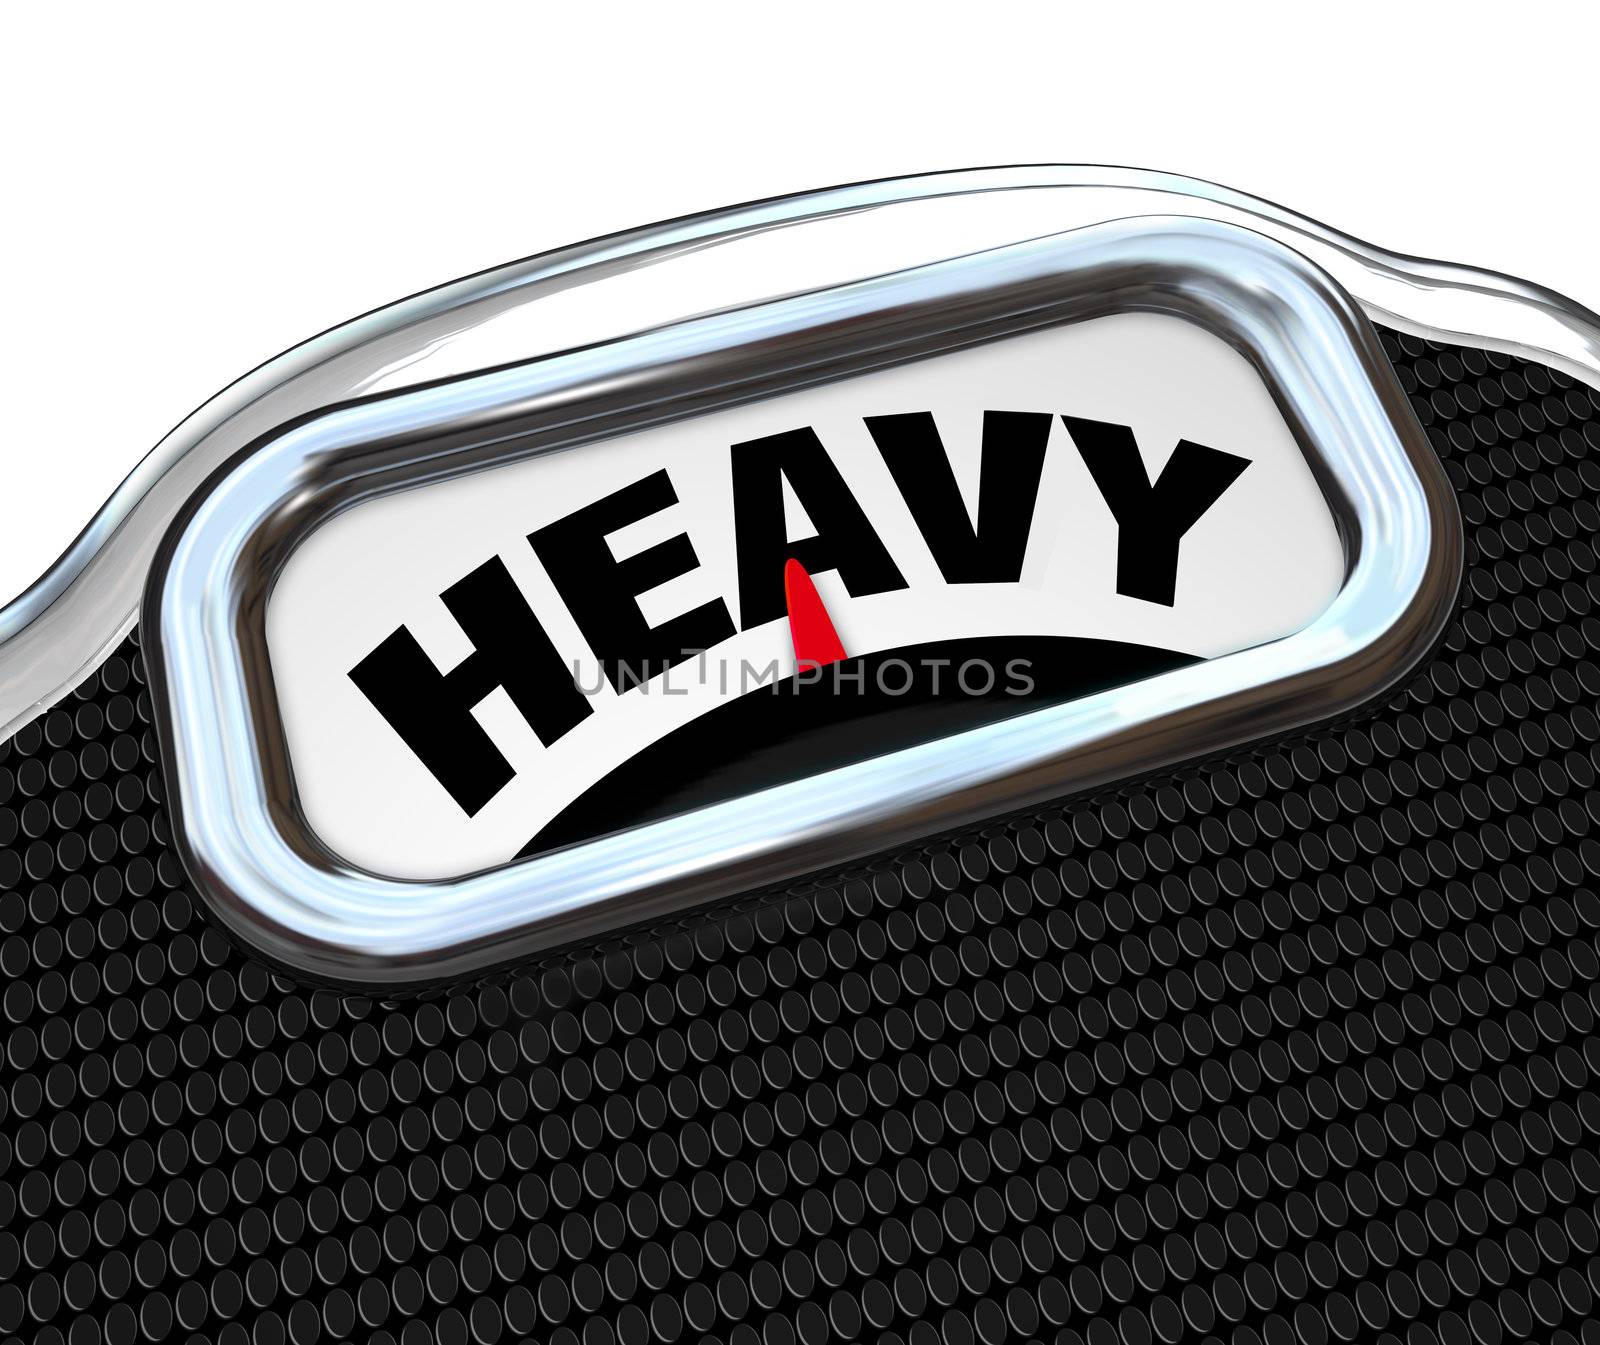 The word Heavy on the display of a scale in close-up, measuring weight or mass to determine if you are overweight and need to diet to improve your health and lose weight